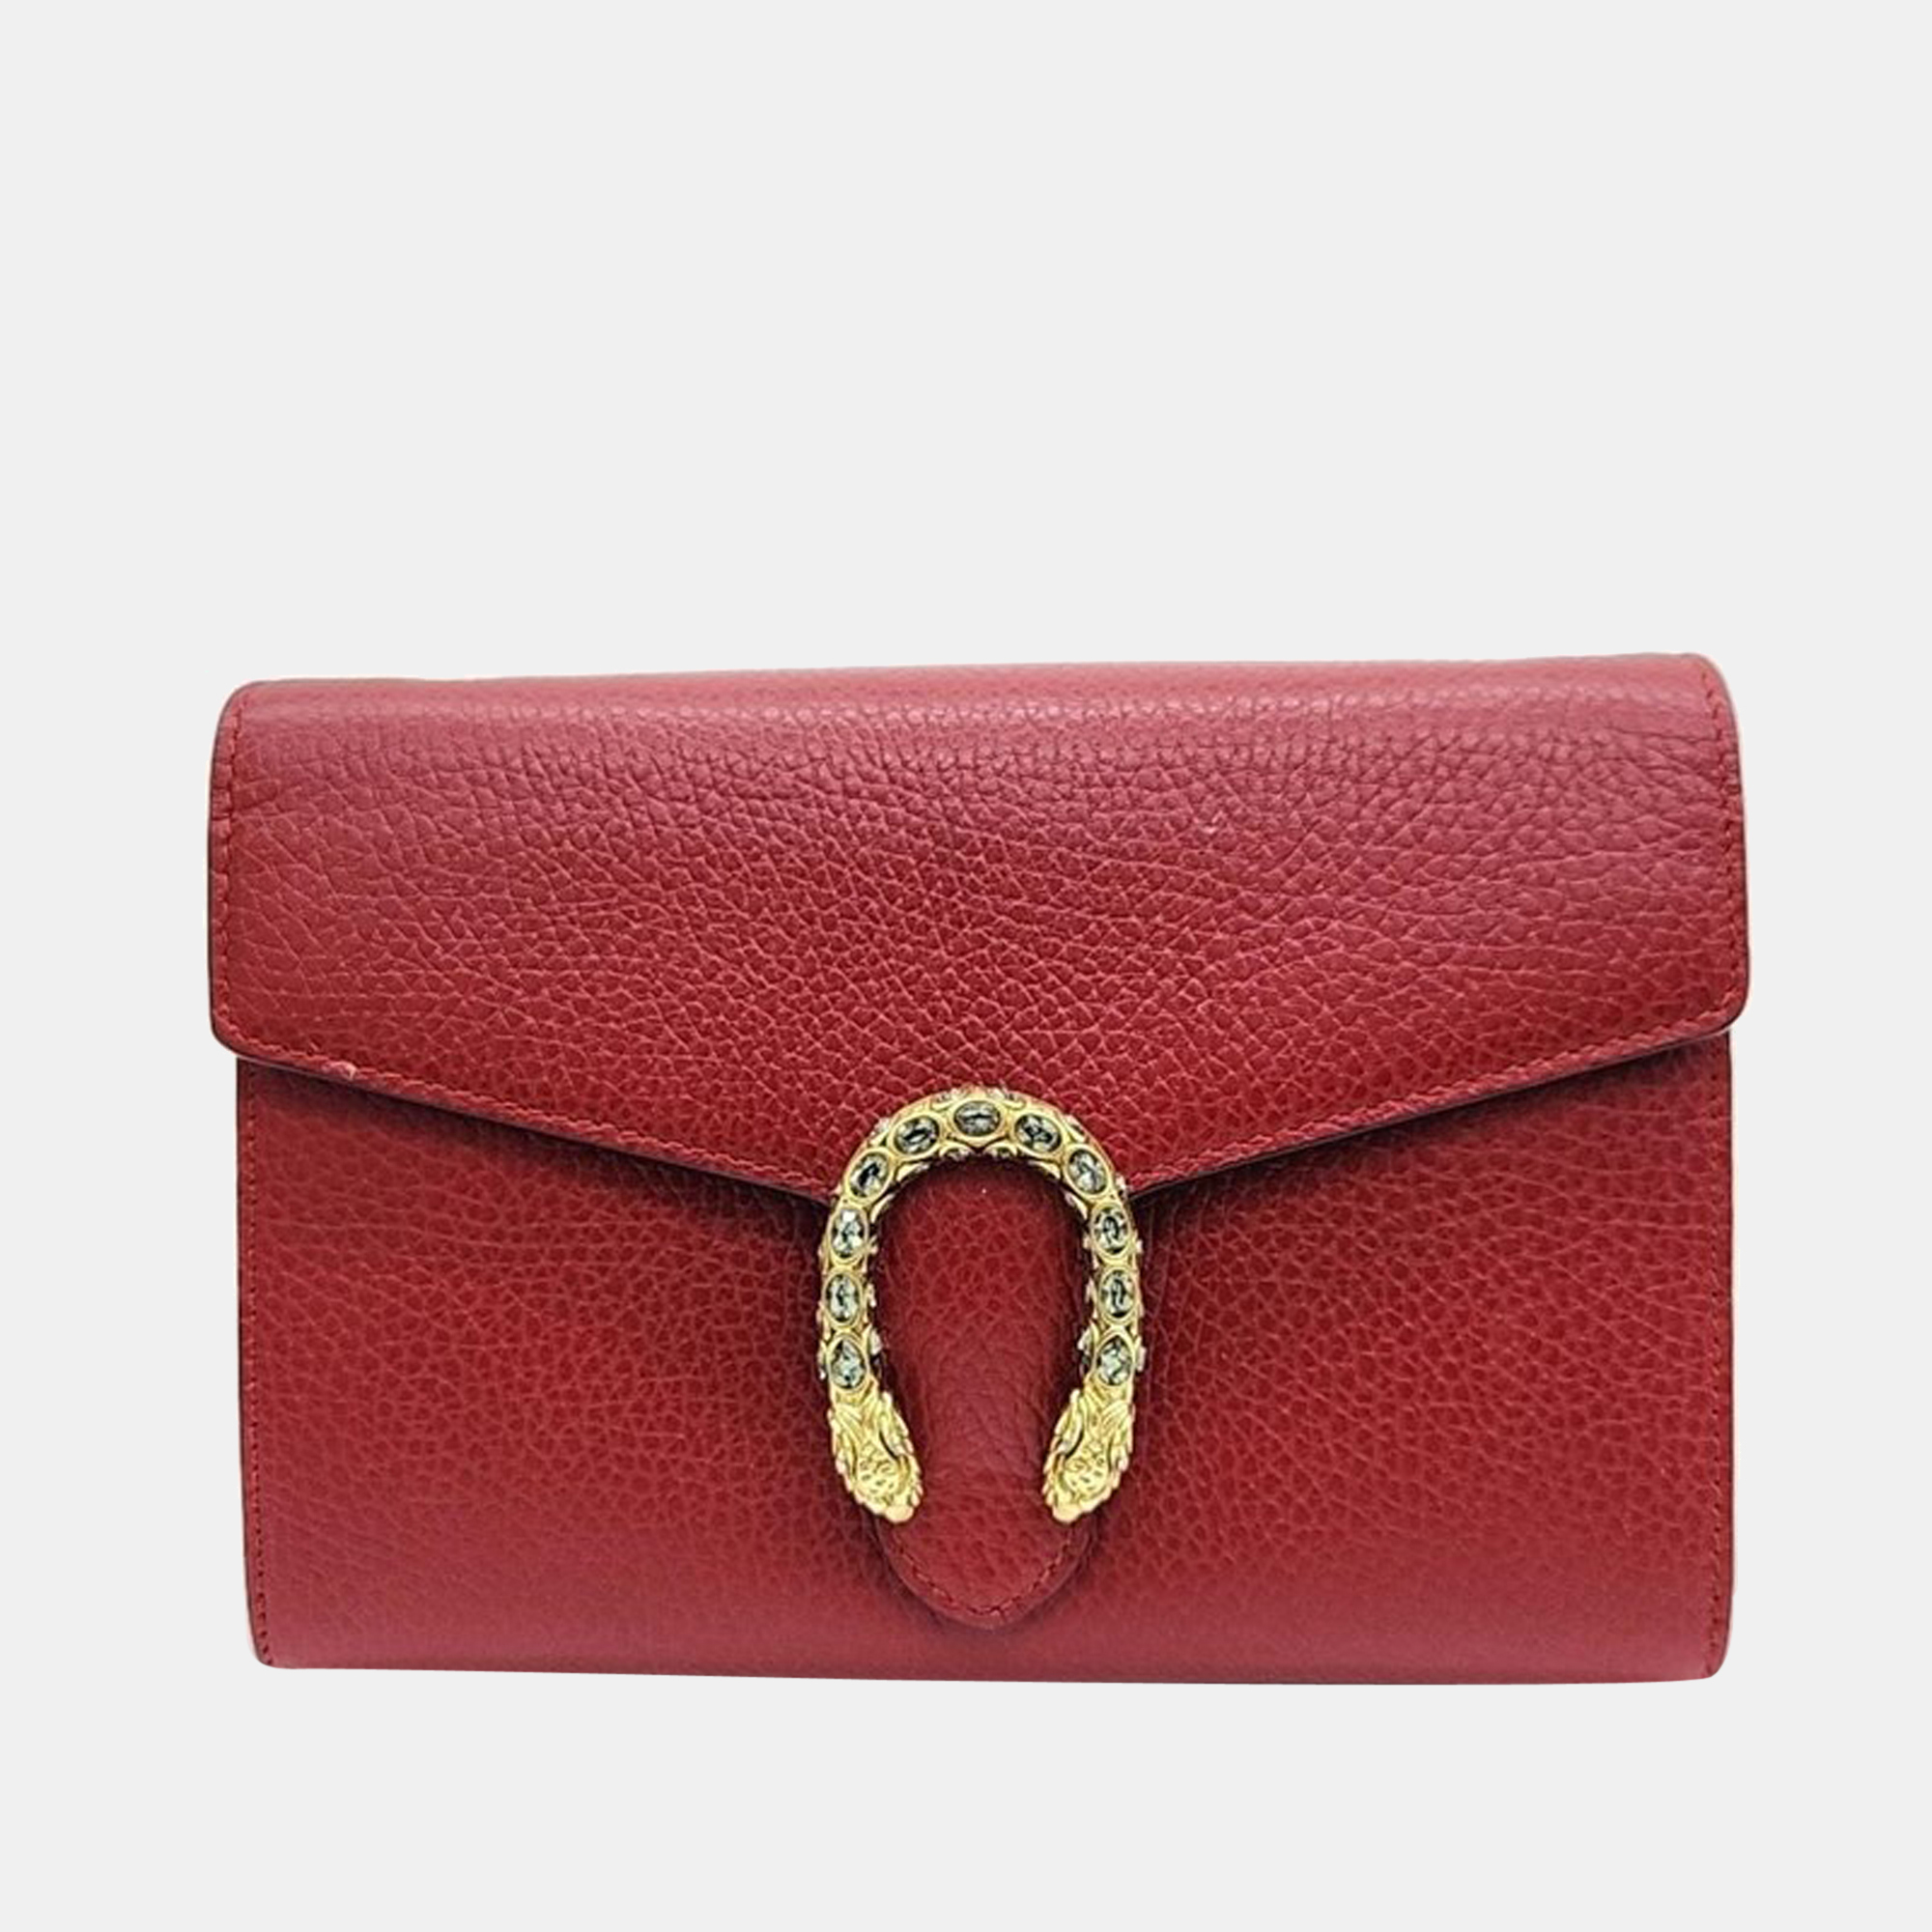 Gucci red leather dionysus clutch on chain bag